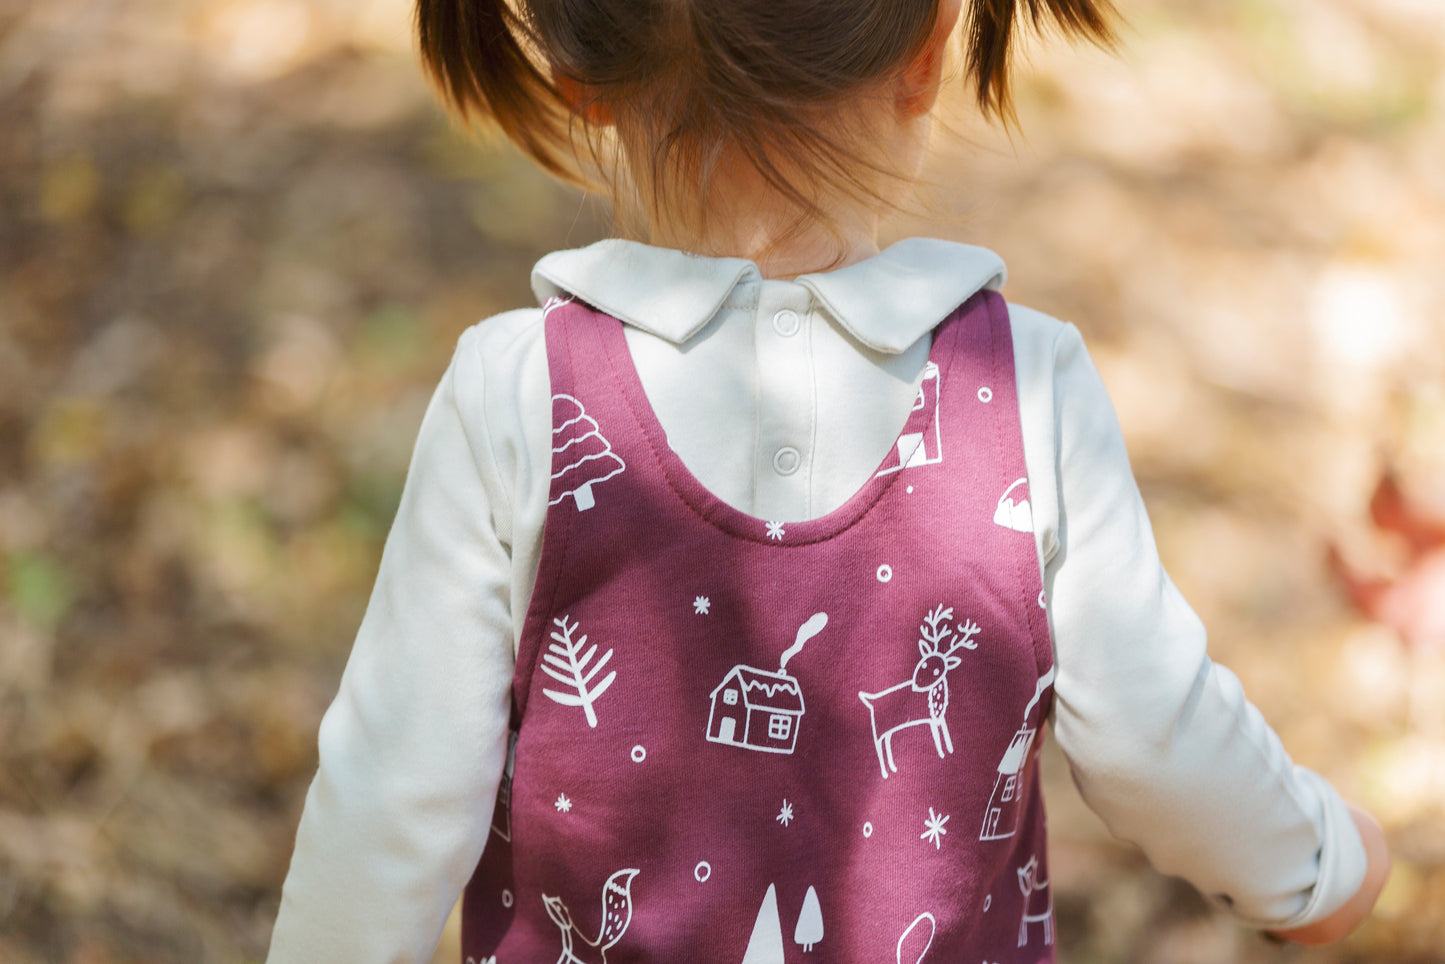 New "Yucca" Dungarees - Aged 6m to 3 Yrs- Colored Bordeaux